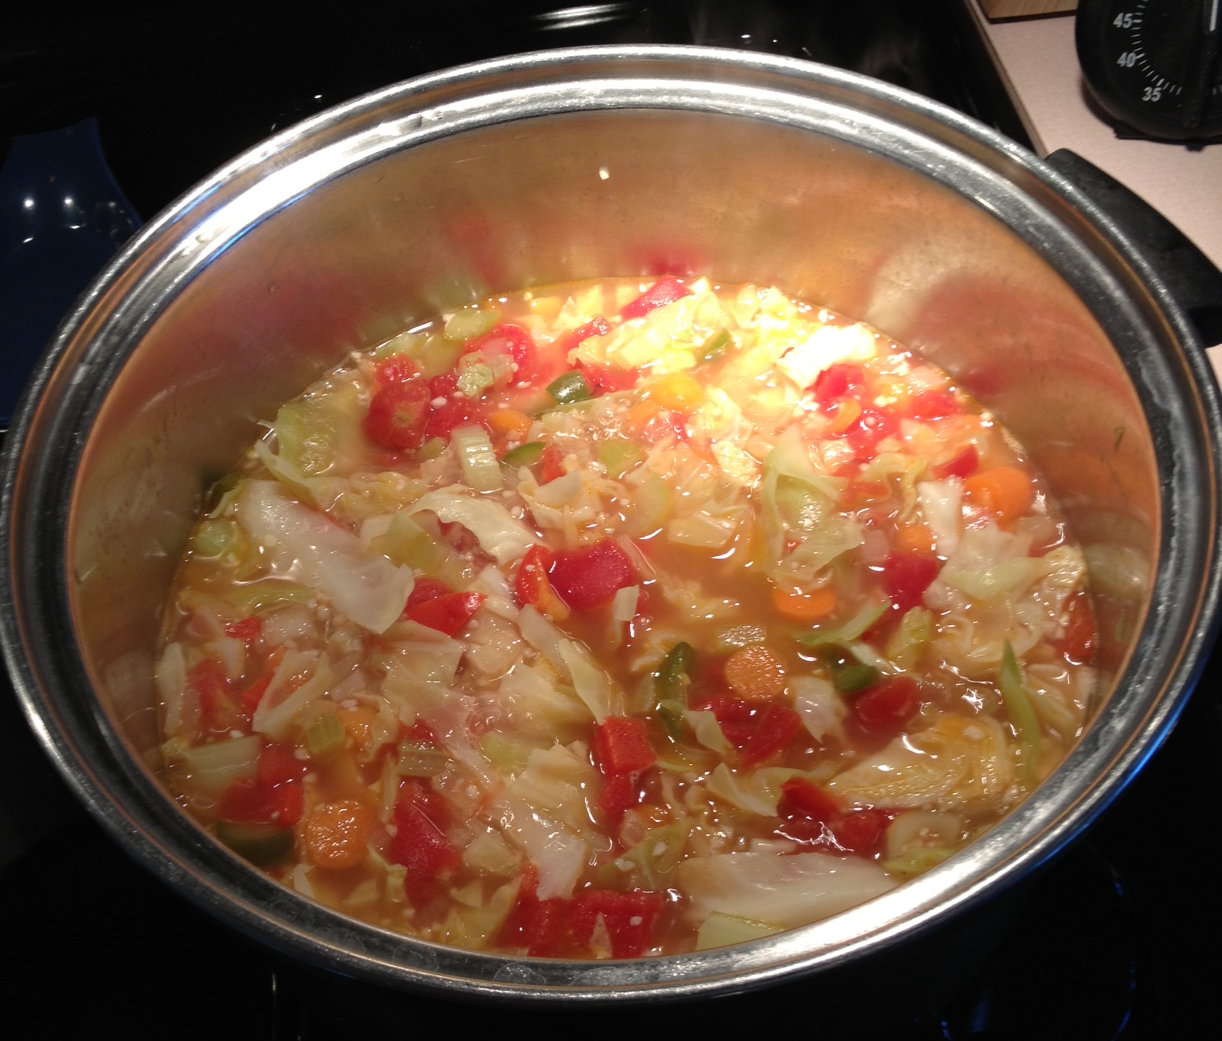 cabbage soup diet recipe 7 day plan 1 4